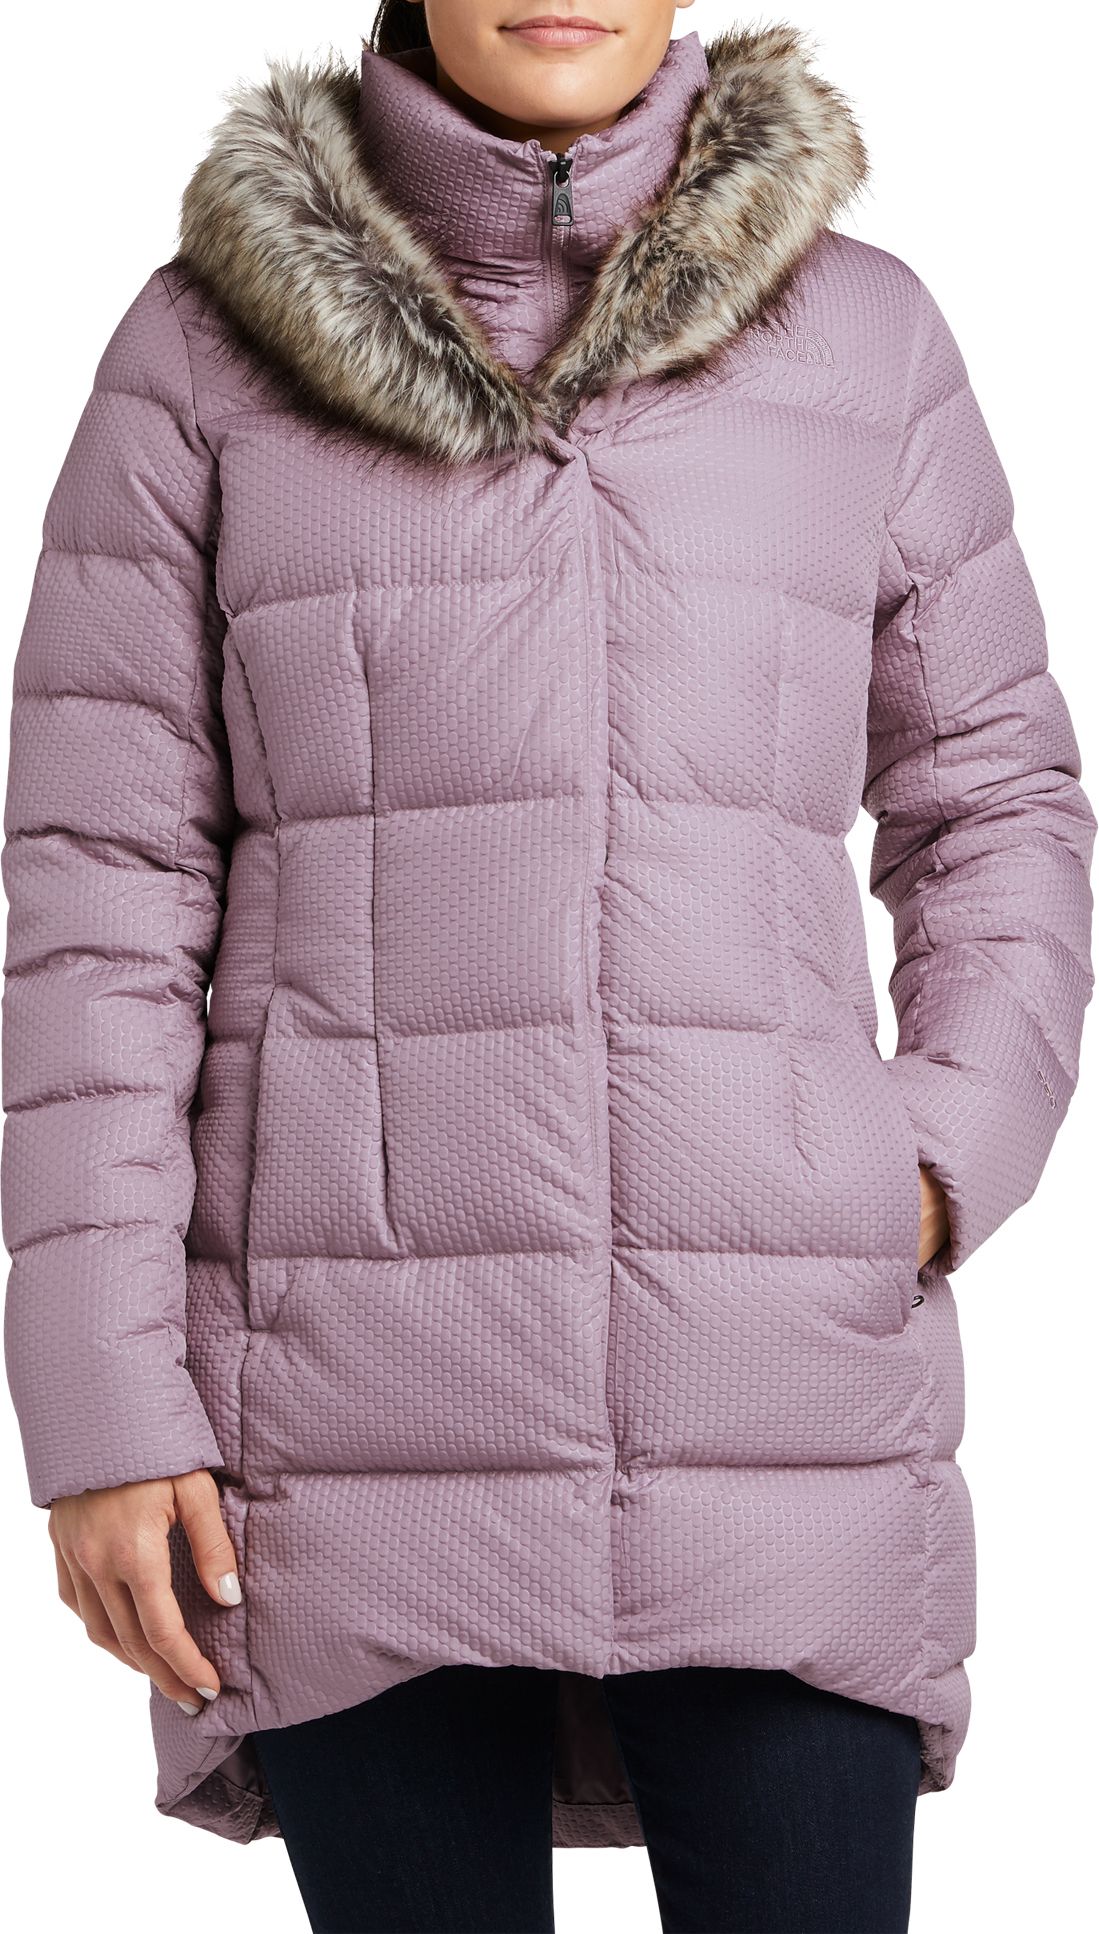 north face women's coat with hood